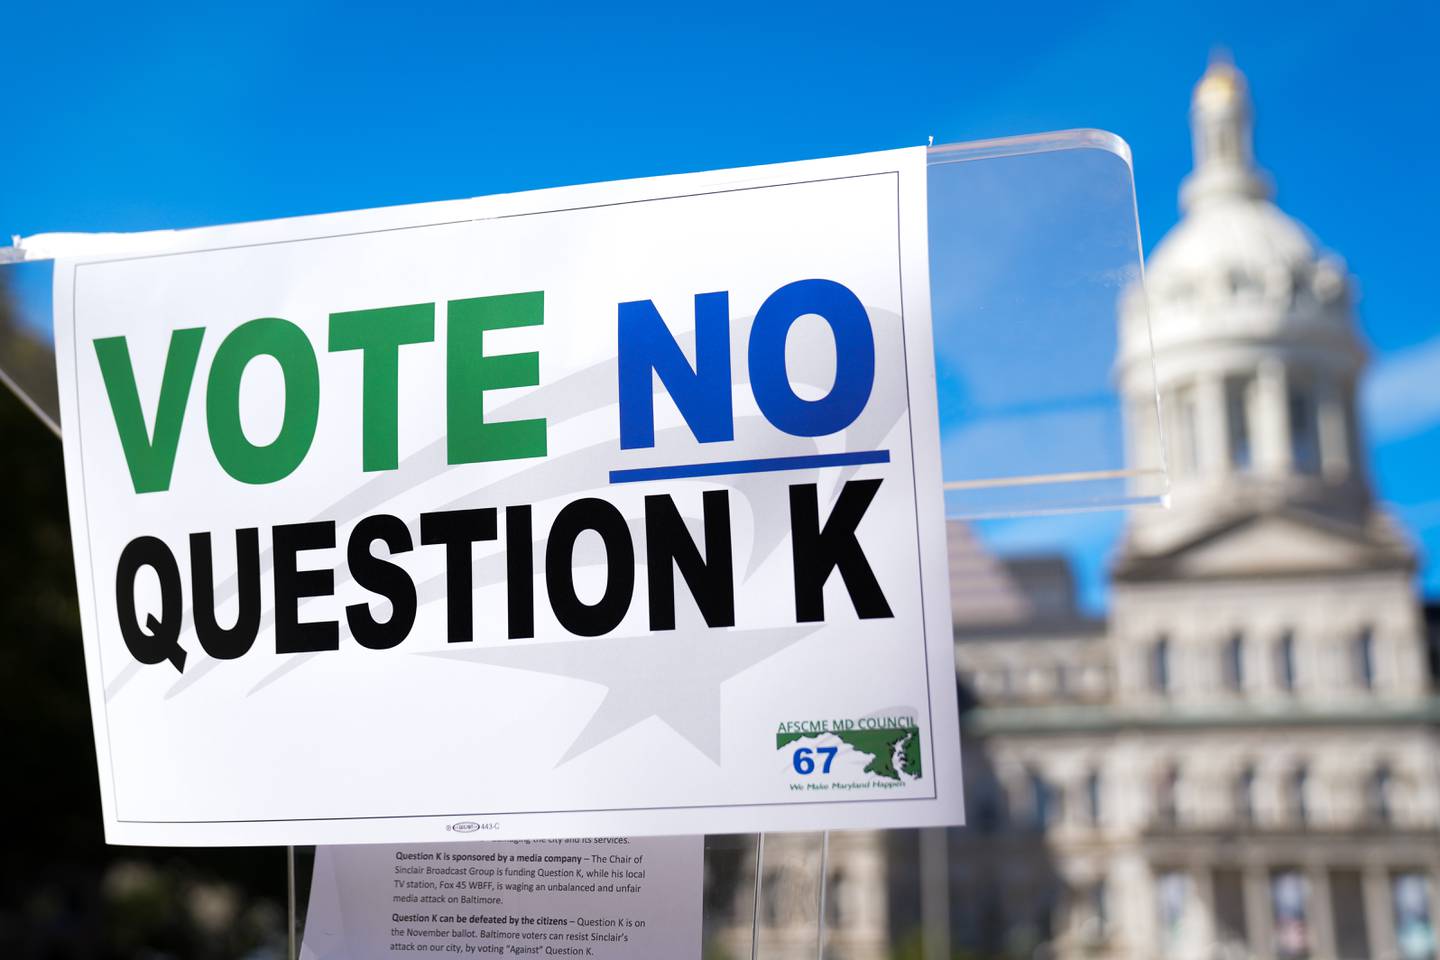 A sign encouraging Baltimore voters to vote no on Question K in the upcoming general election is taped to a lectern during a press conference at War Memorial Plaza on 10/6/22. The question would determine whether or not term limits are imposed on a number of elected positions in the city.